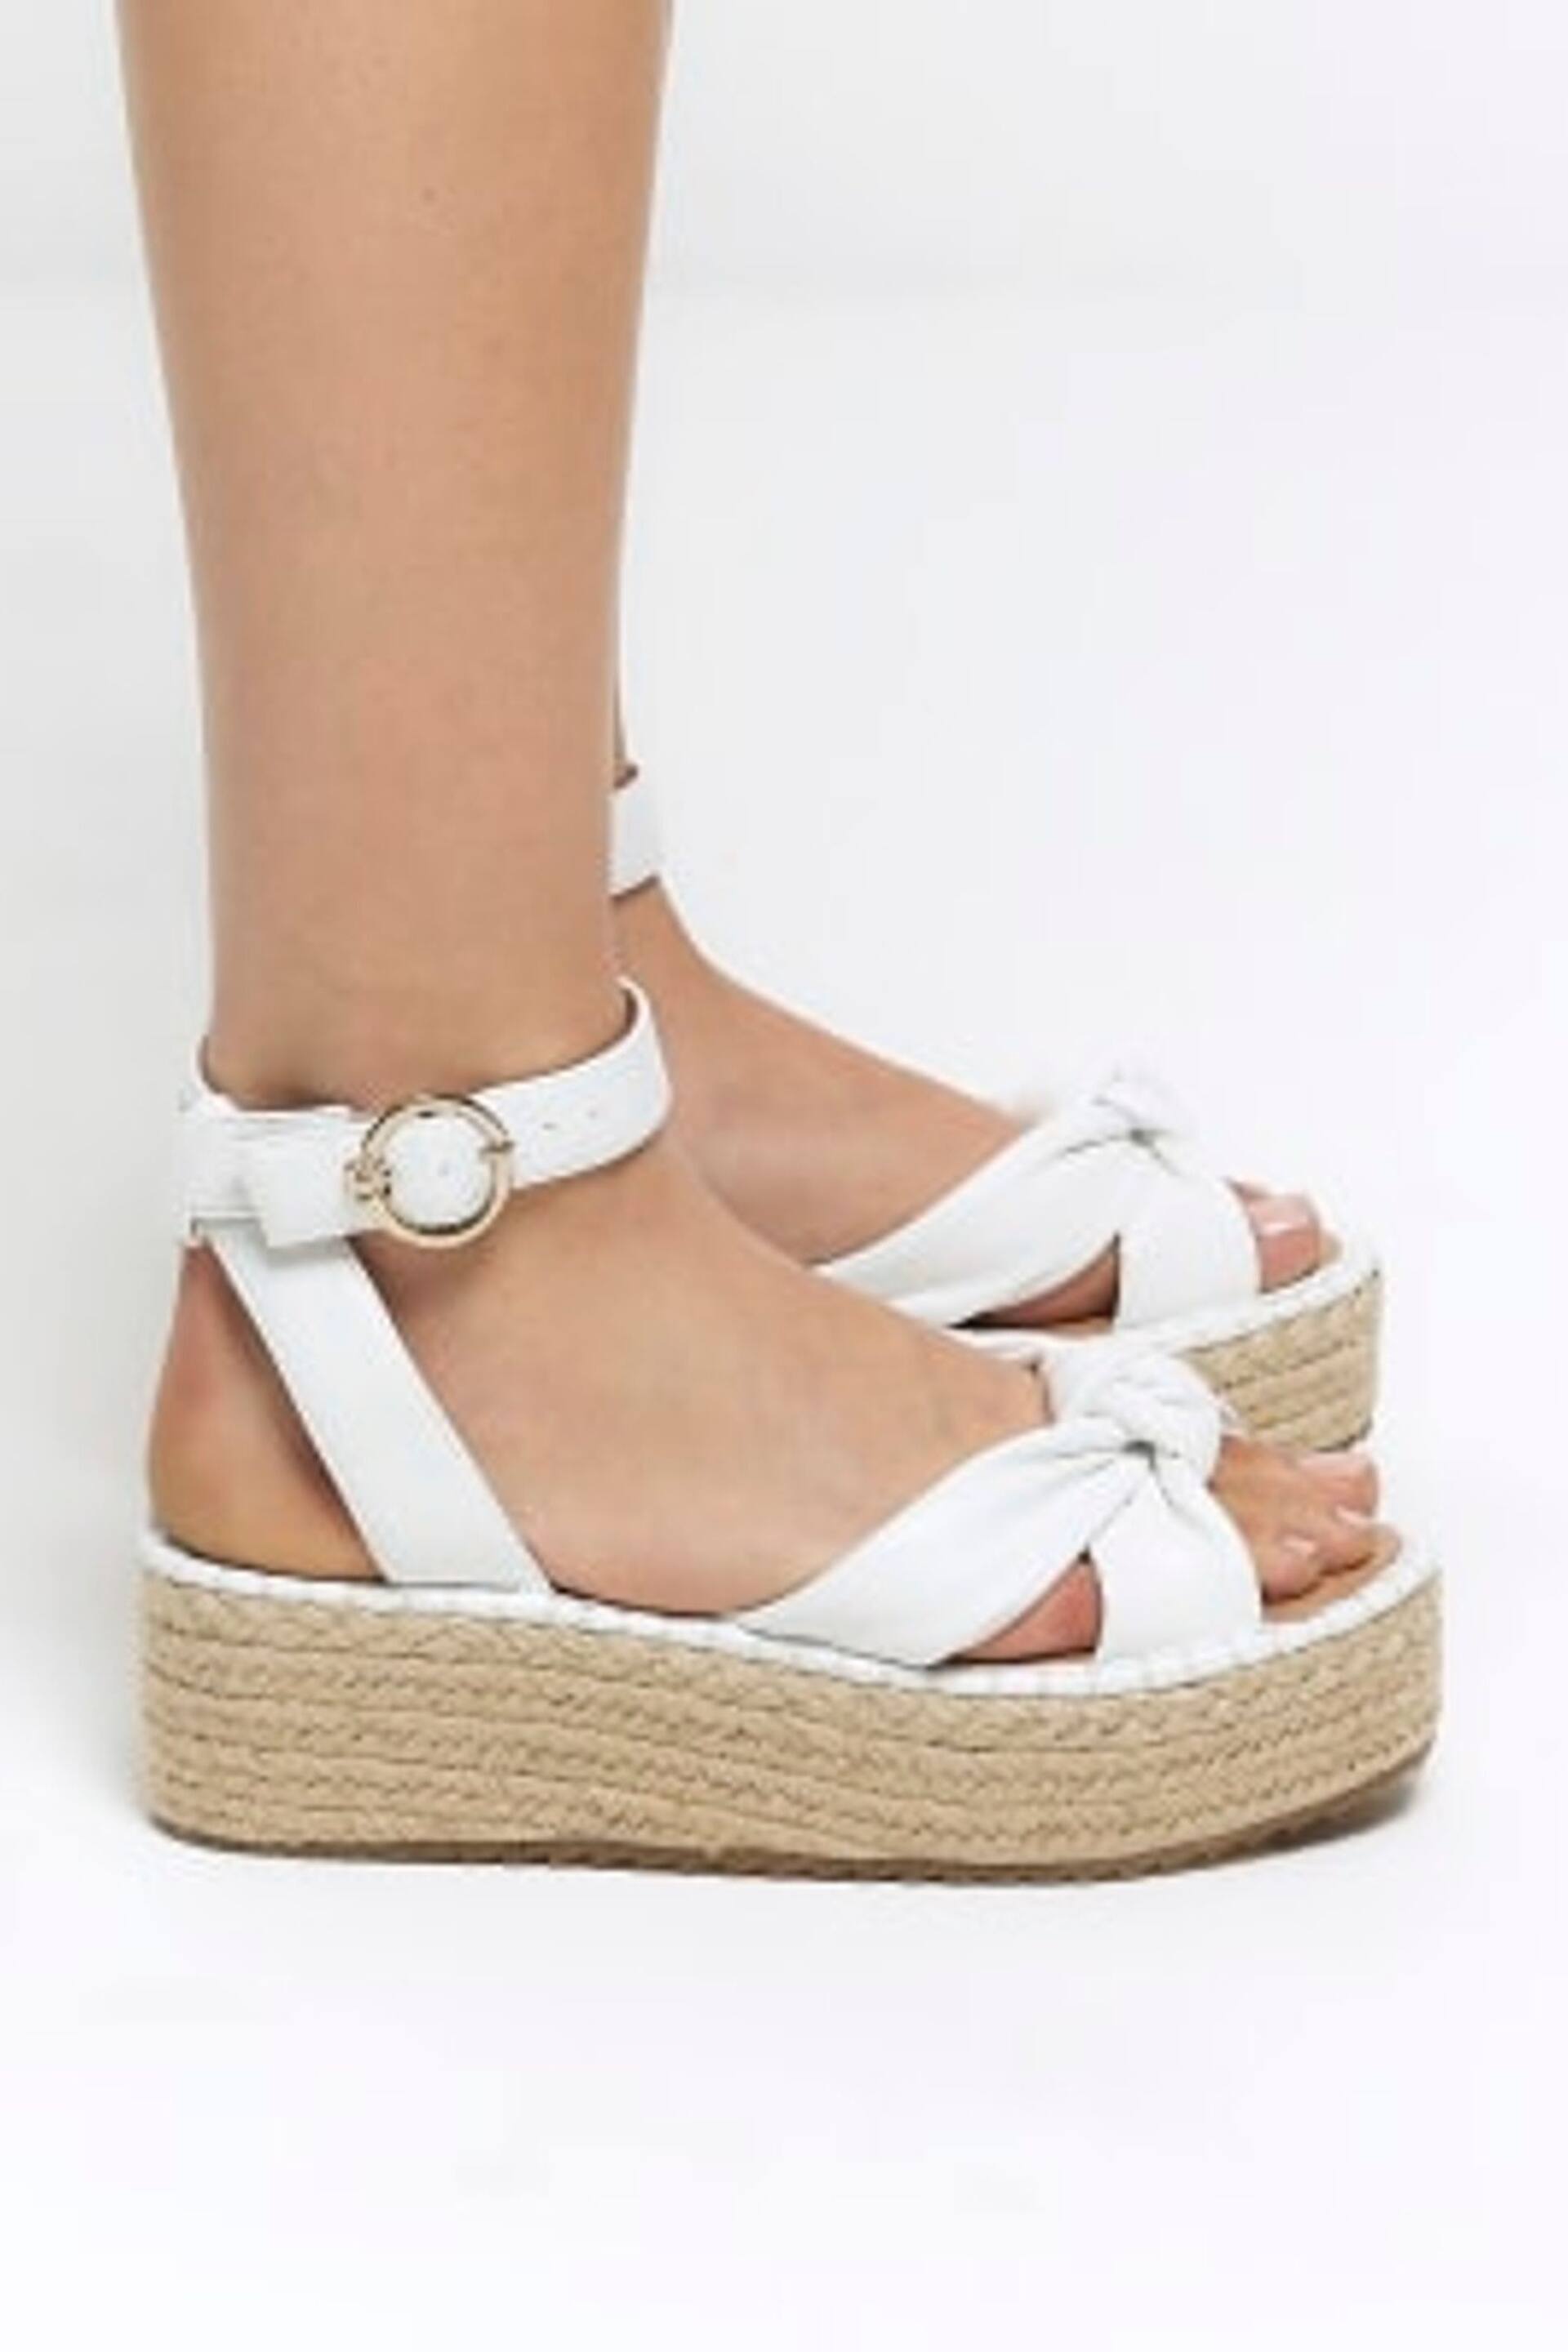 River Island White Espadrille Sandals - Image 5 of 5